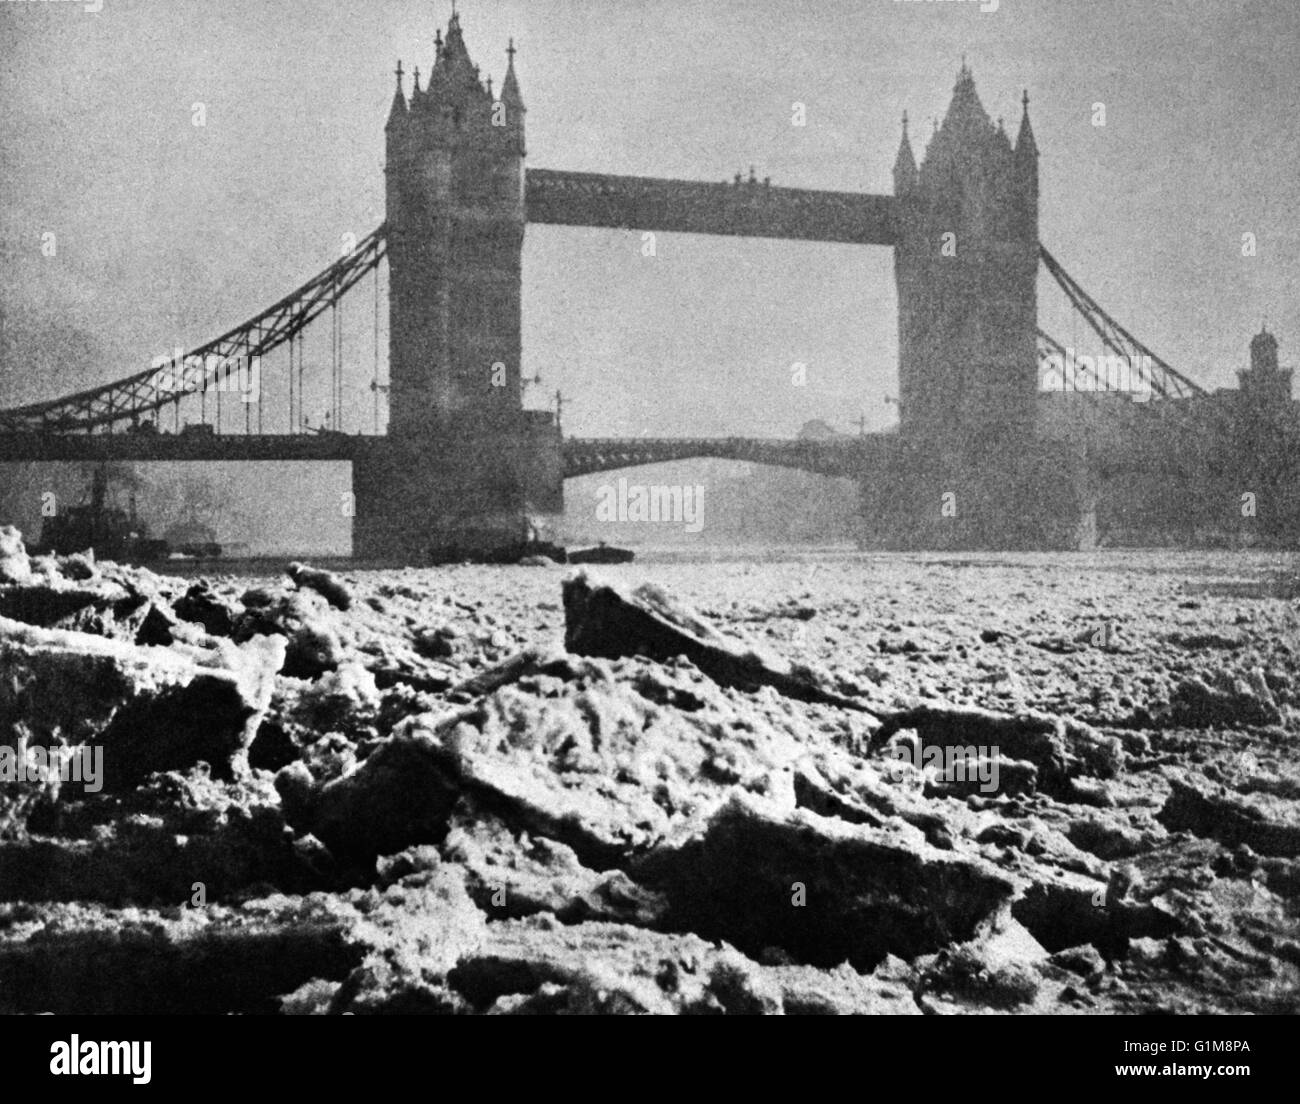 A view of Tower Bridge on the River Thames in London, when the river froze over in December of 1895. ... Buildings and Landmarks - Tower Bridge - London - 1895 ... 31-12-1895 ... London ... England ... Photo credit should read: PA/Unique Reference No. 13499376 ... Stock Photo